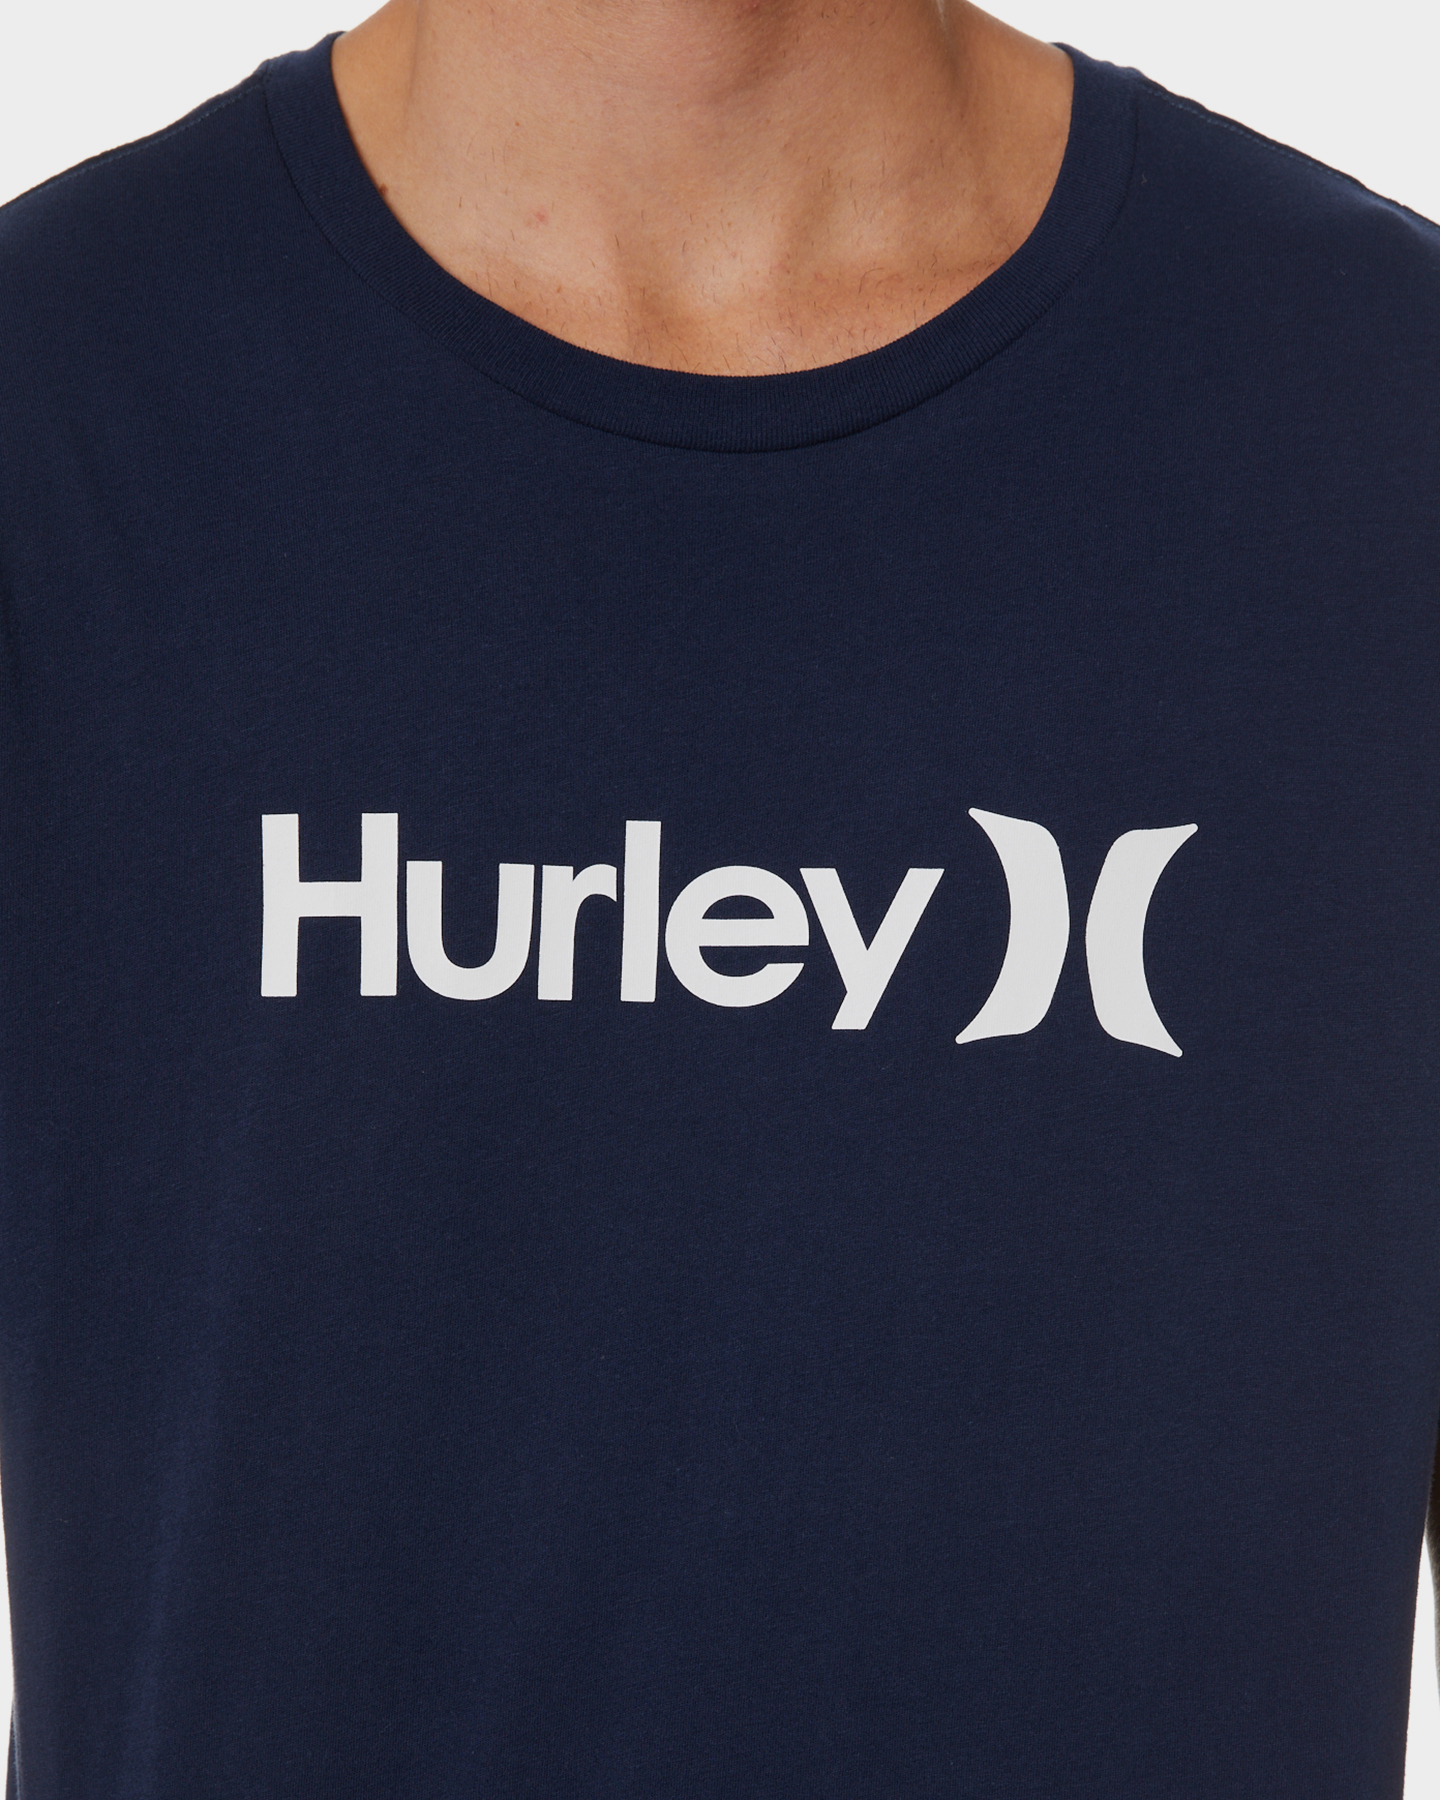 Hurley Evd Wsh Core Oao Mnes Solid Tee - Obsidian | SurfStitch